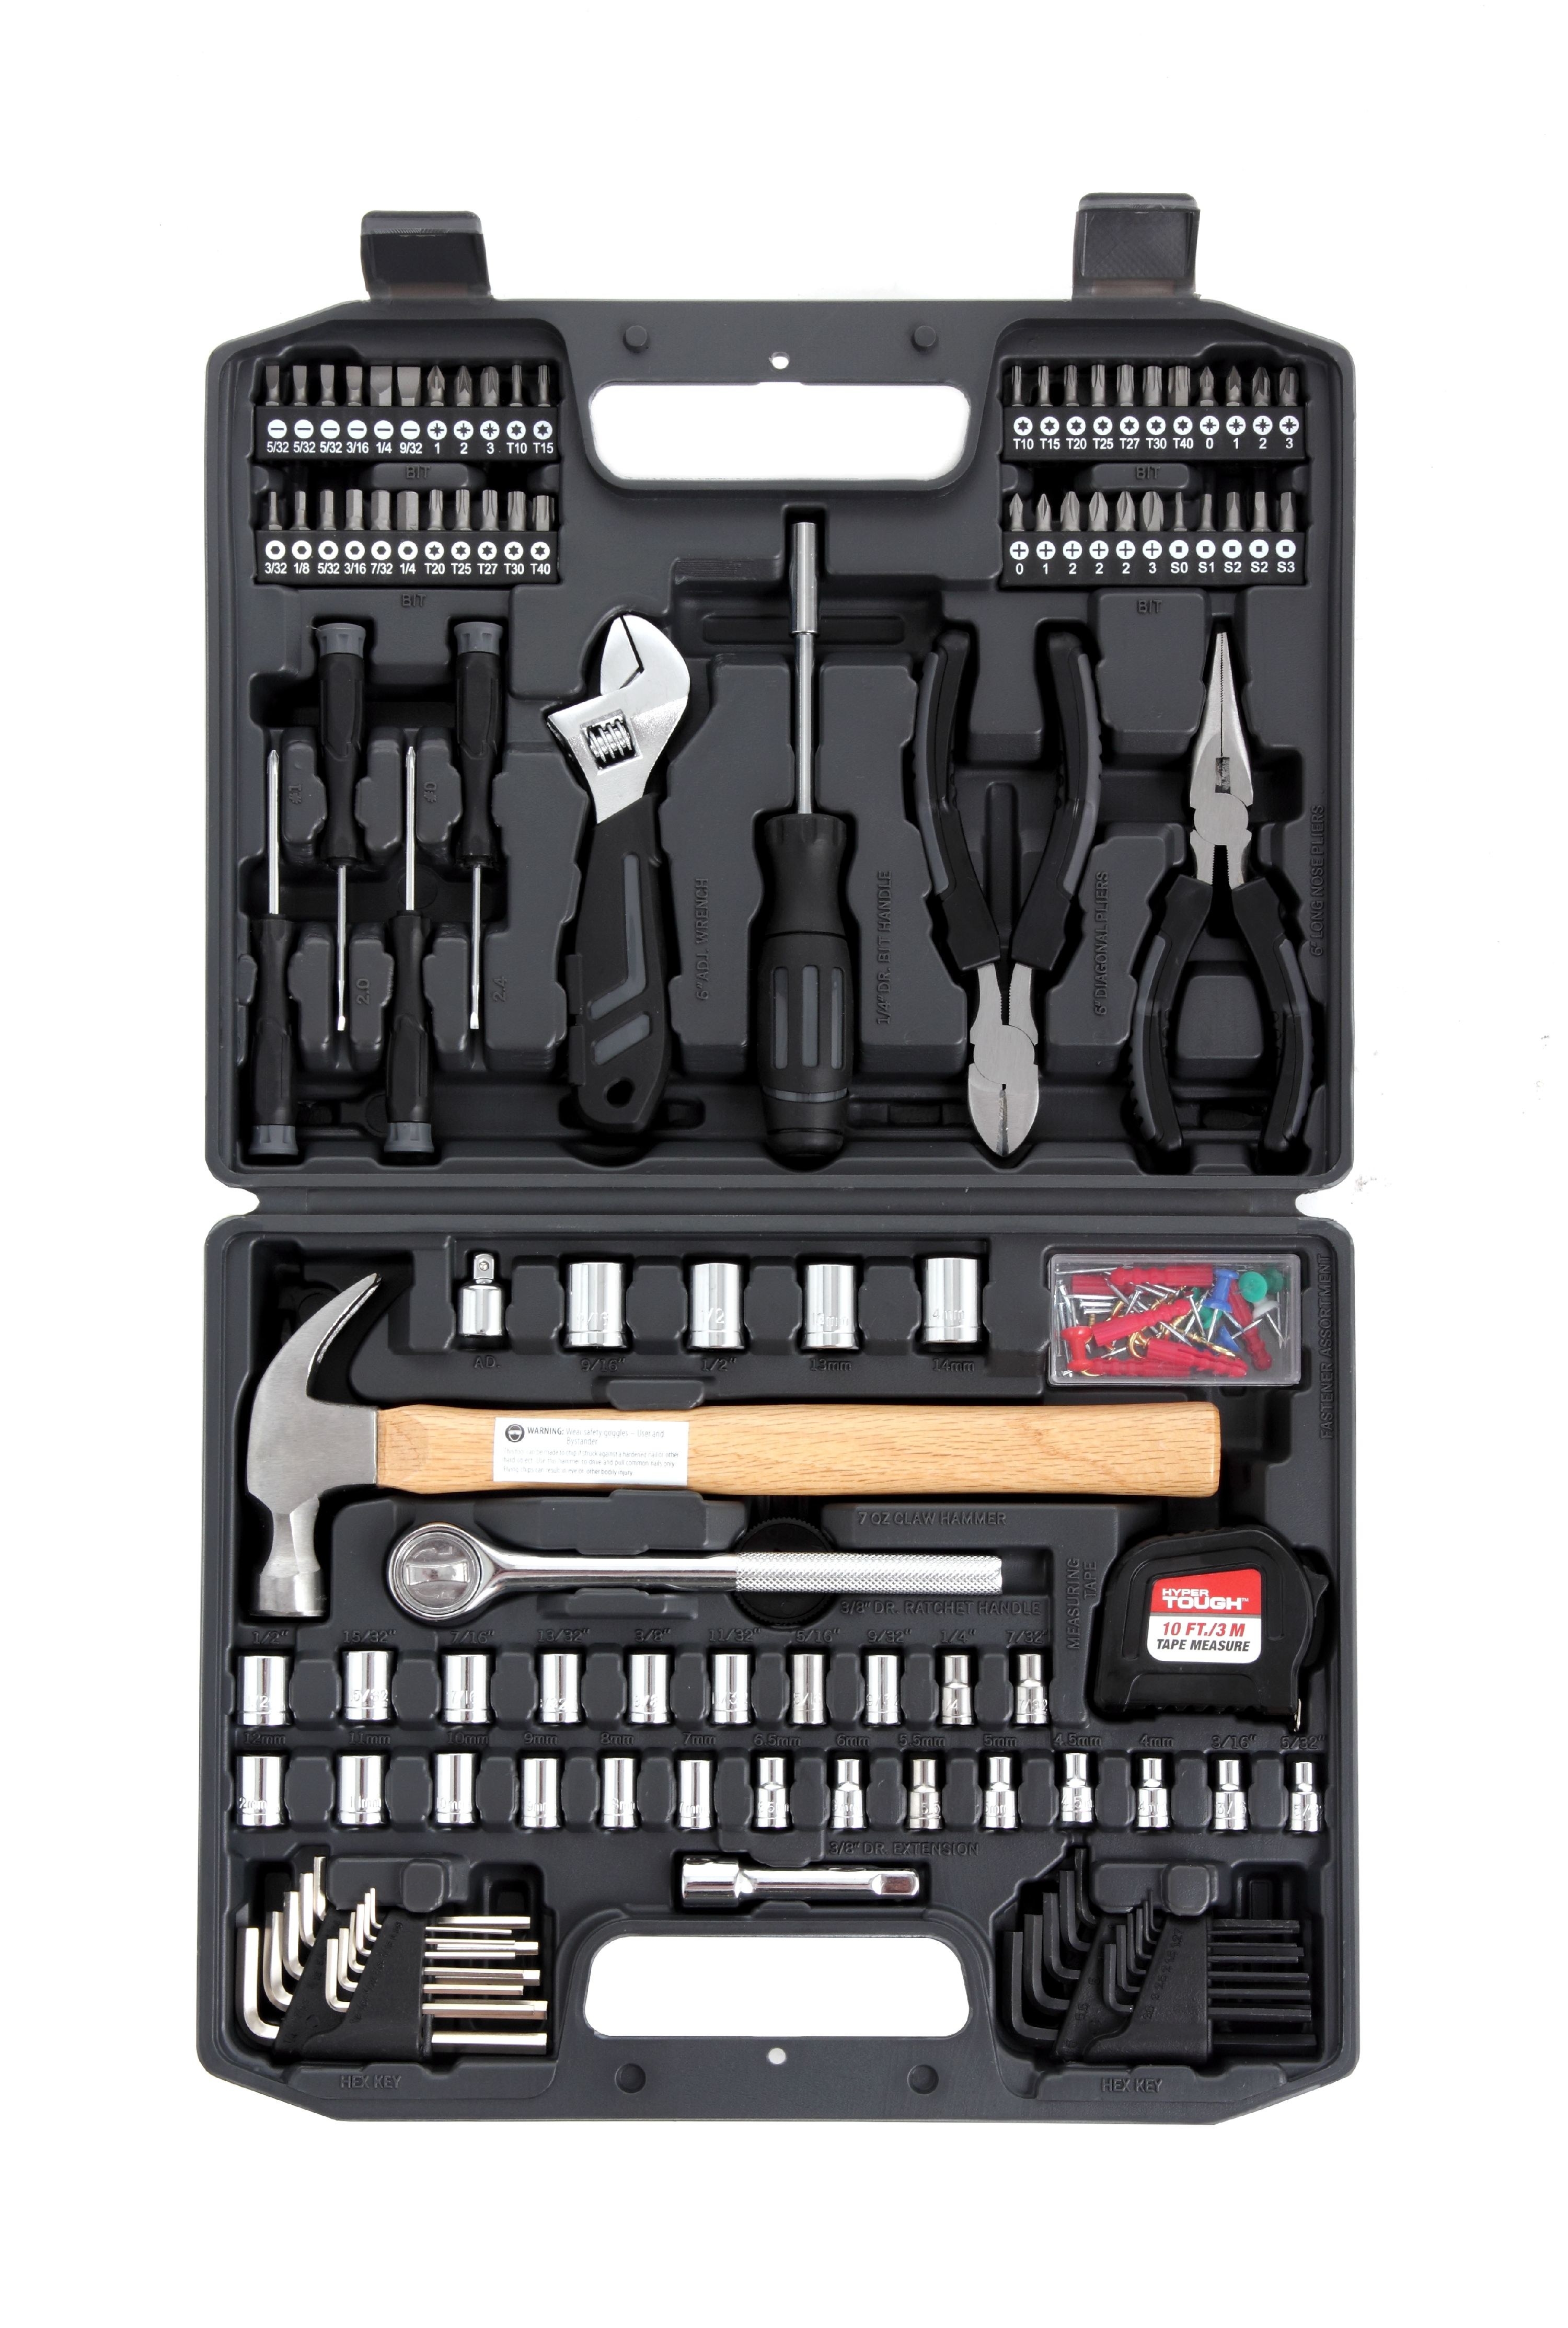 116-piece toolkit including hammer, screwdrivers, bolts, and more